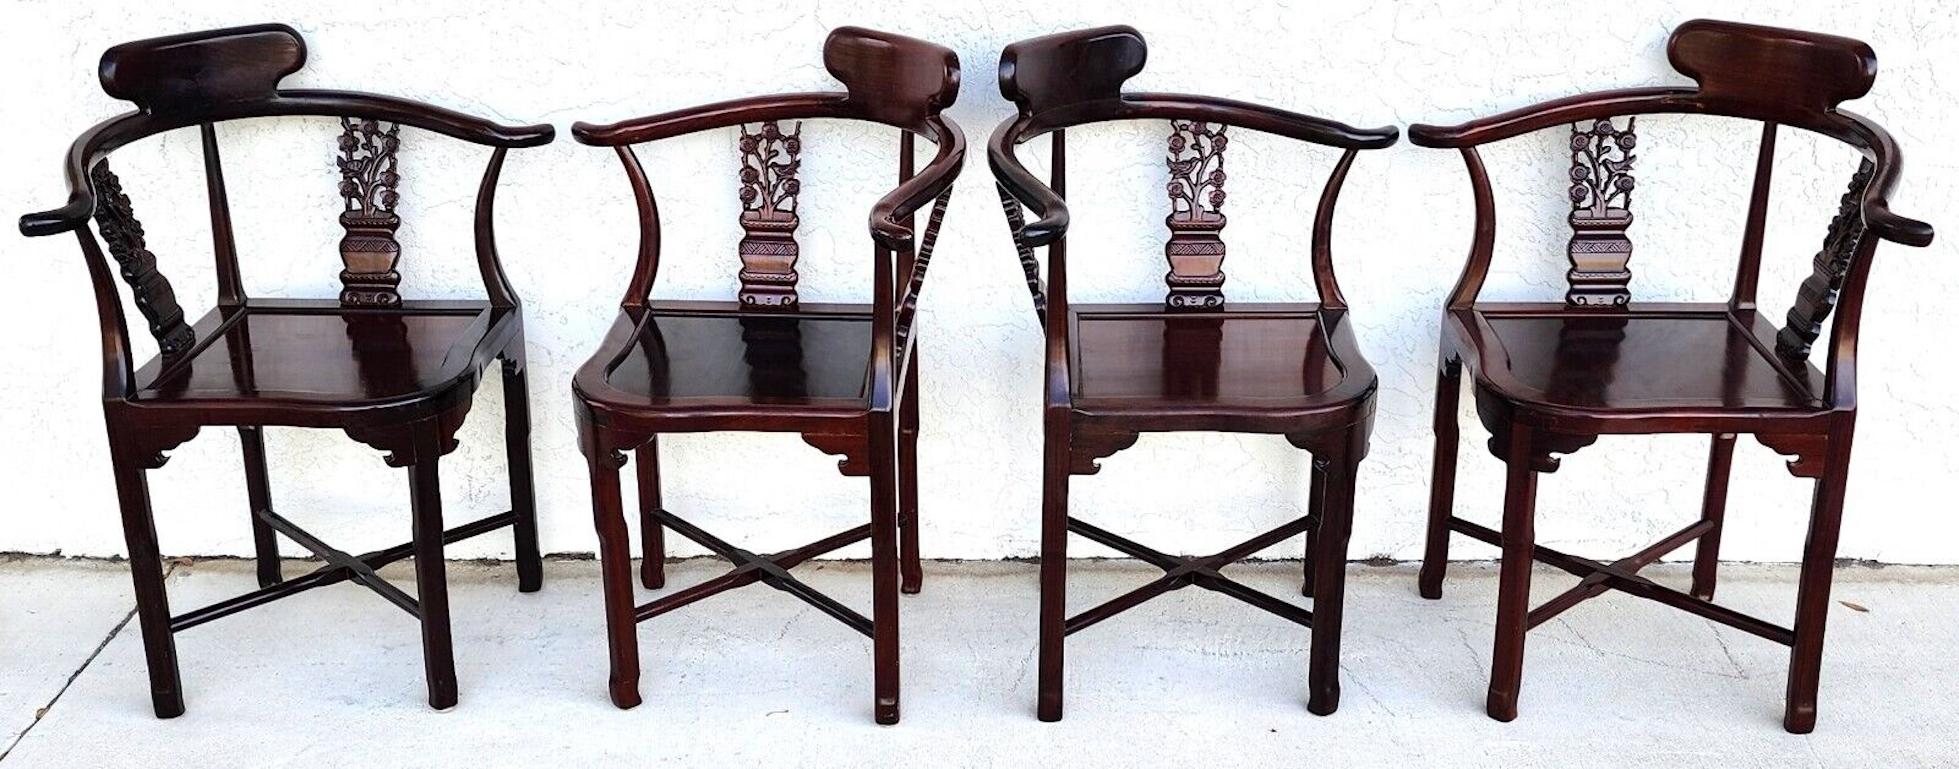 For FULL item description click on CONTINUE READING at the bottom of this page.

Offering One Of Our Recent Palm Beach Estate Fine Furniture Acquisitions Of A
Set of 4 1970s Chinese Carved Rosewood Corner Dining Chairs 

Approximate Measurements in